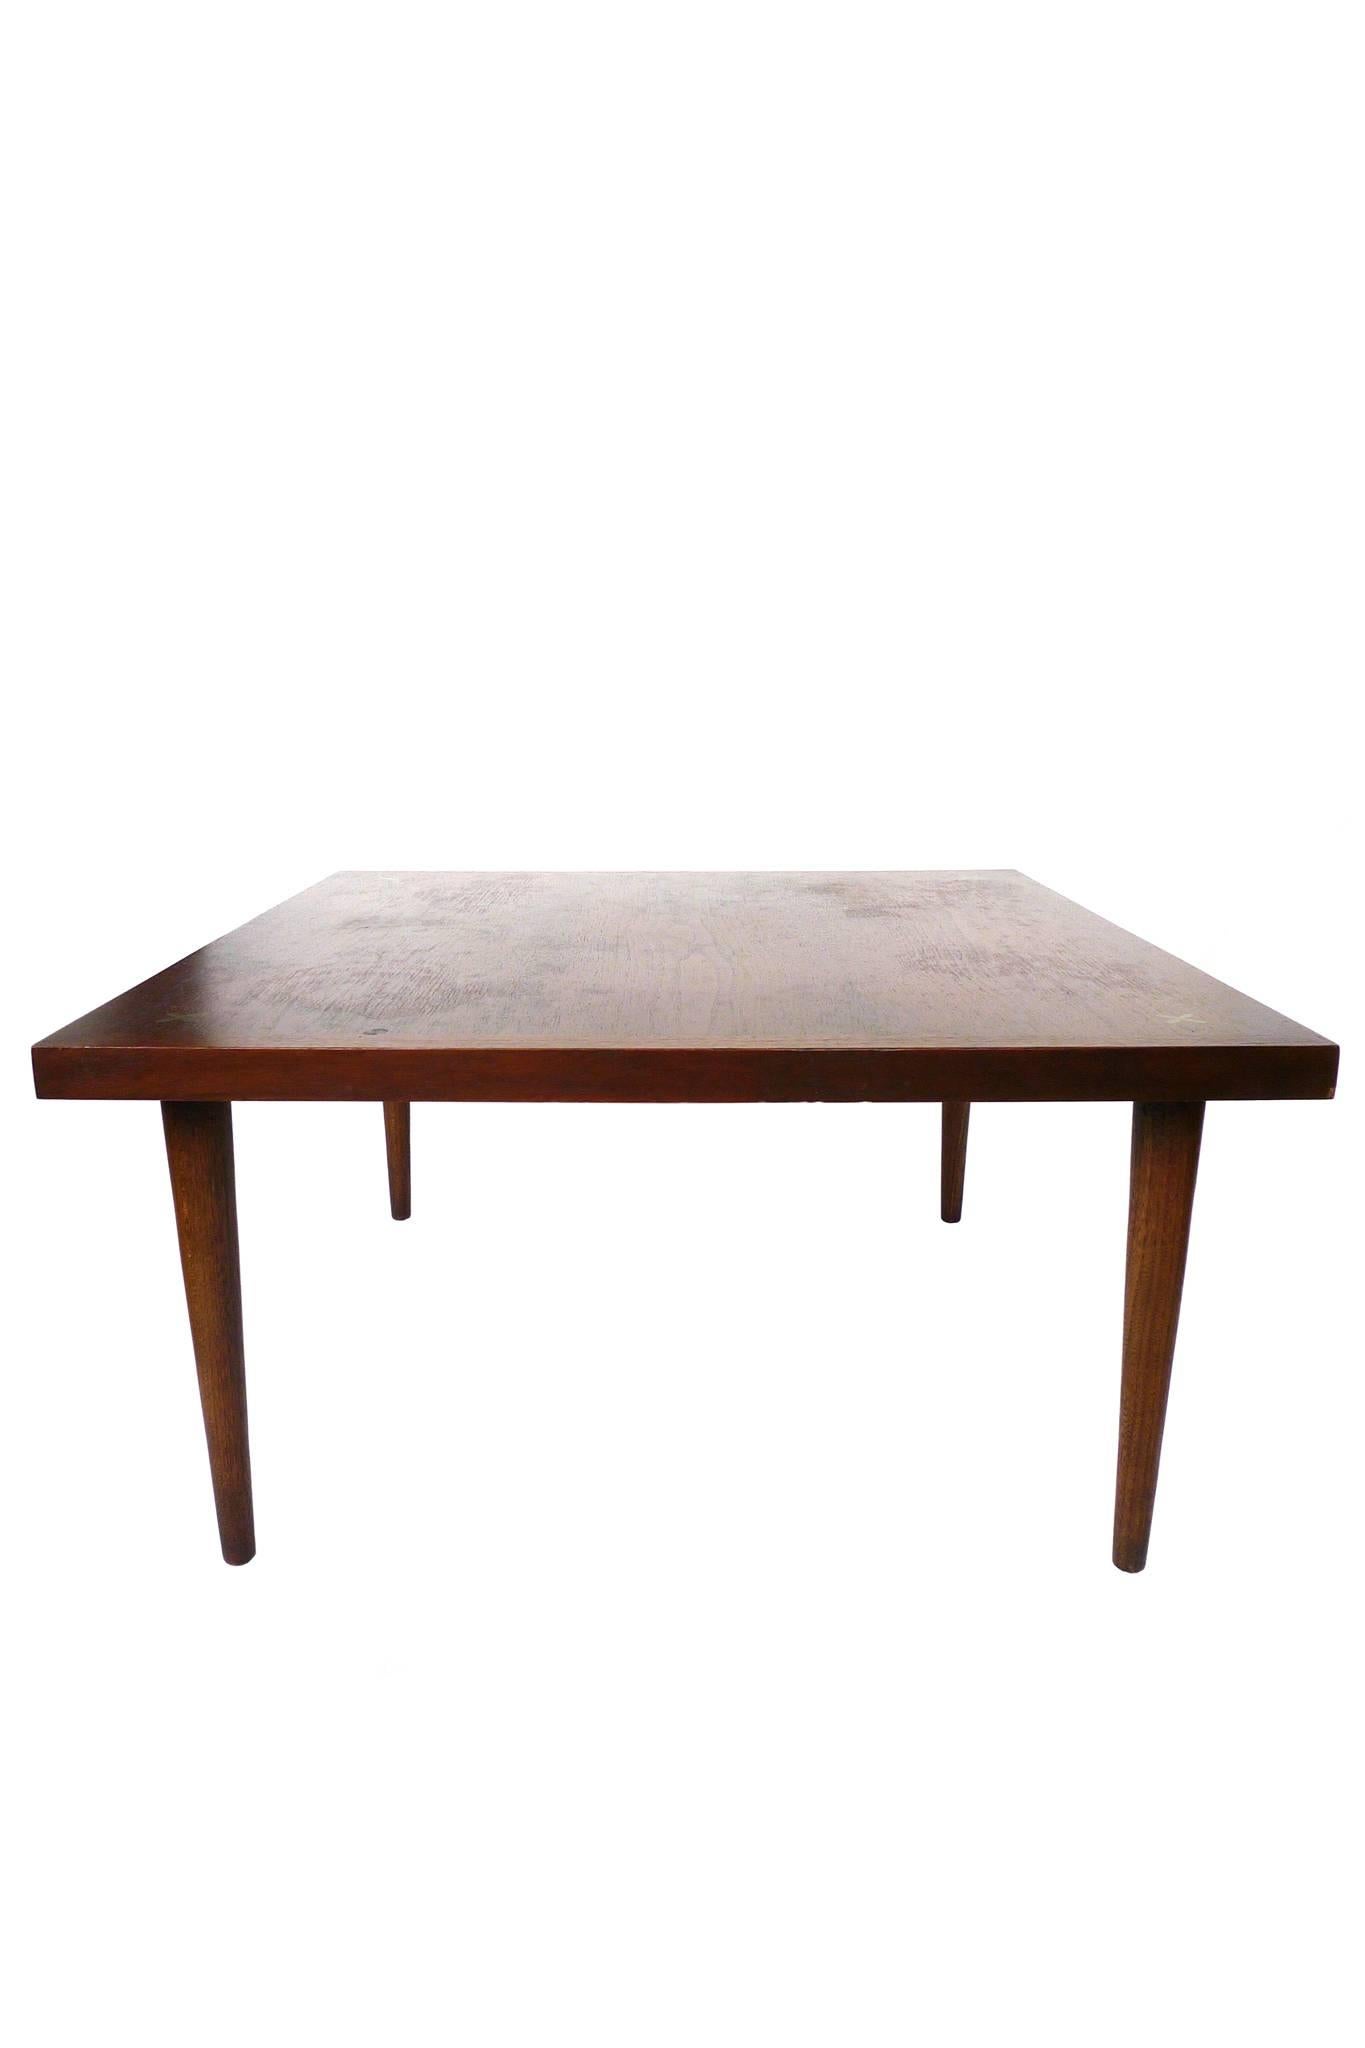 This cocktail table was designed by Merton Gershun for American of Martinsville. It is walnut with a rich dark finish. Brass x-inlays adorn the tabletop, one at each corner. while the legs are high and taper downward. This is an elegant cocktail